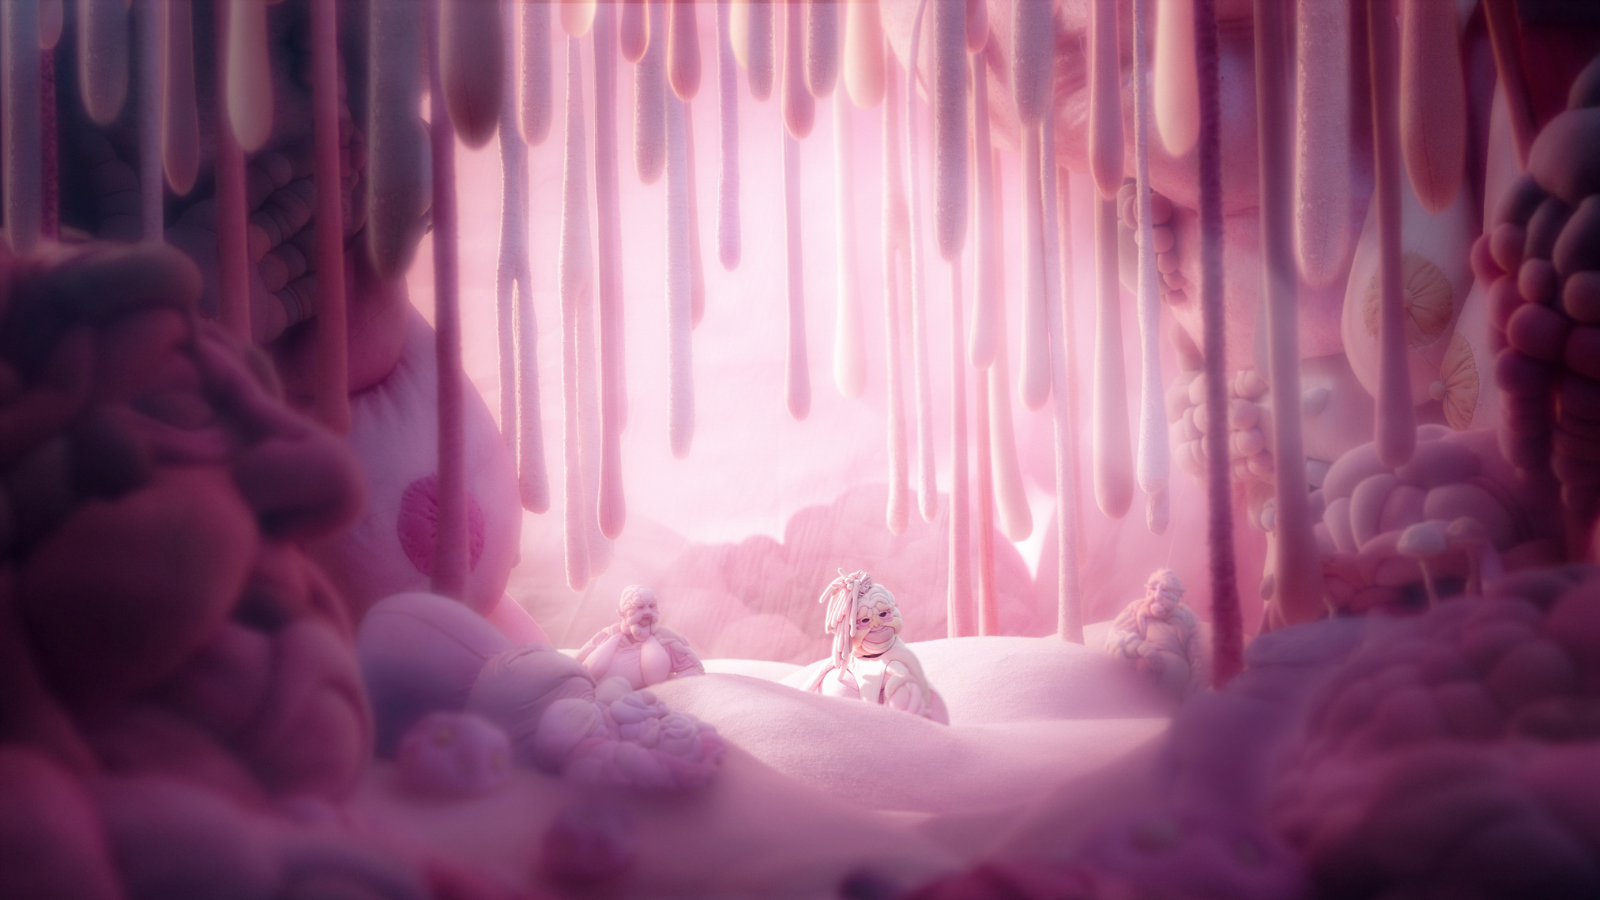 Still from Bod. Animation of pink cave with Stalactites hanging from ceiling. Pink blobby characters also seen,